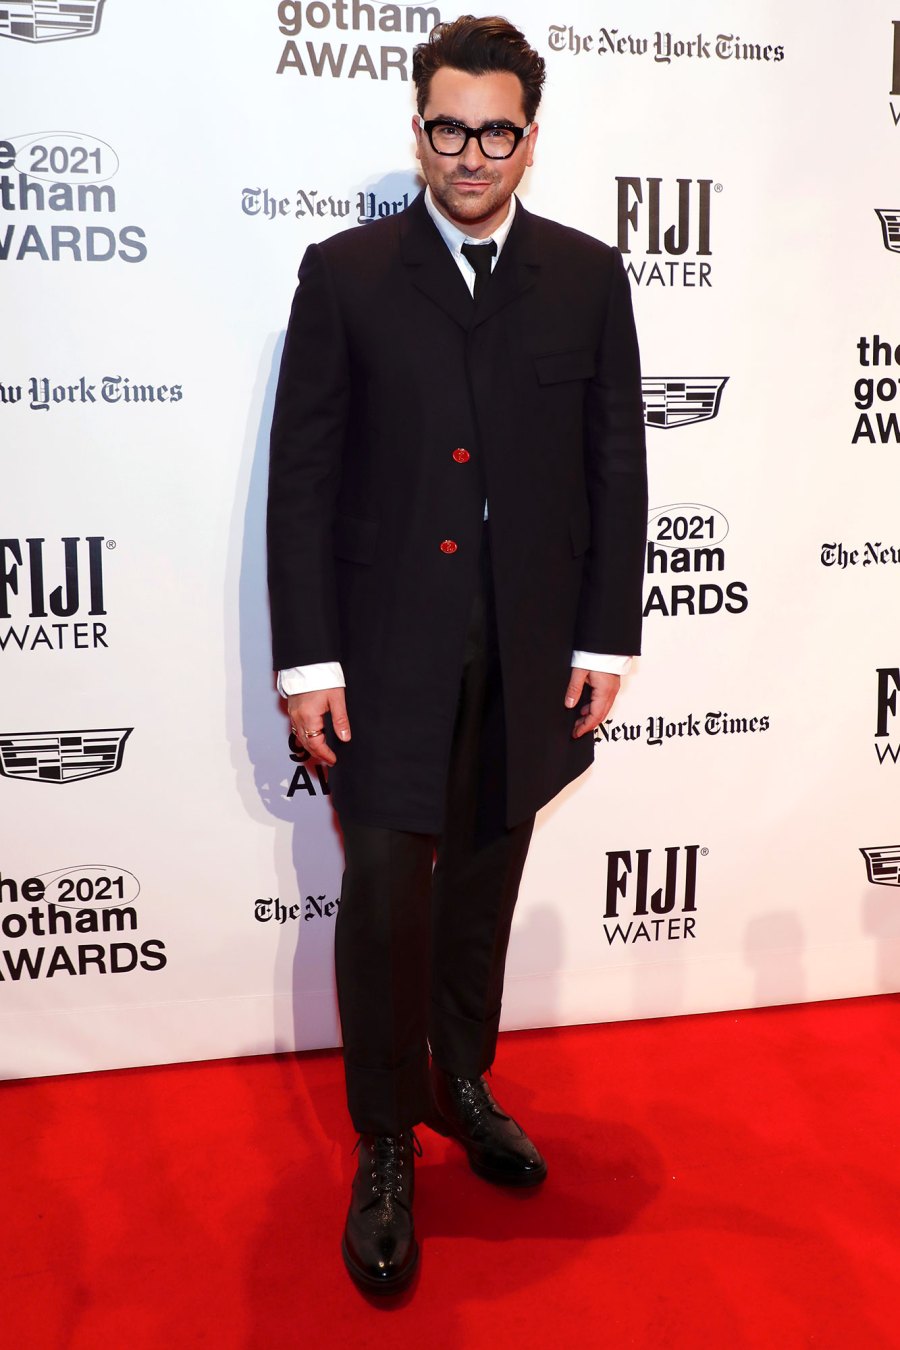 Daniel Levy See What the Stars Wore to the 2021 Gotham Awards